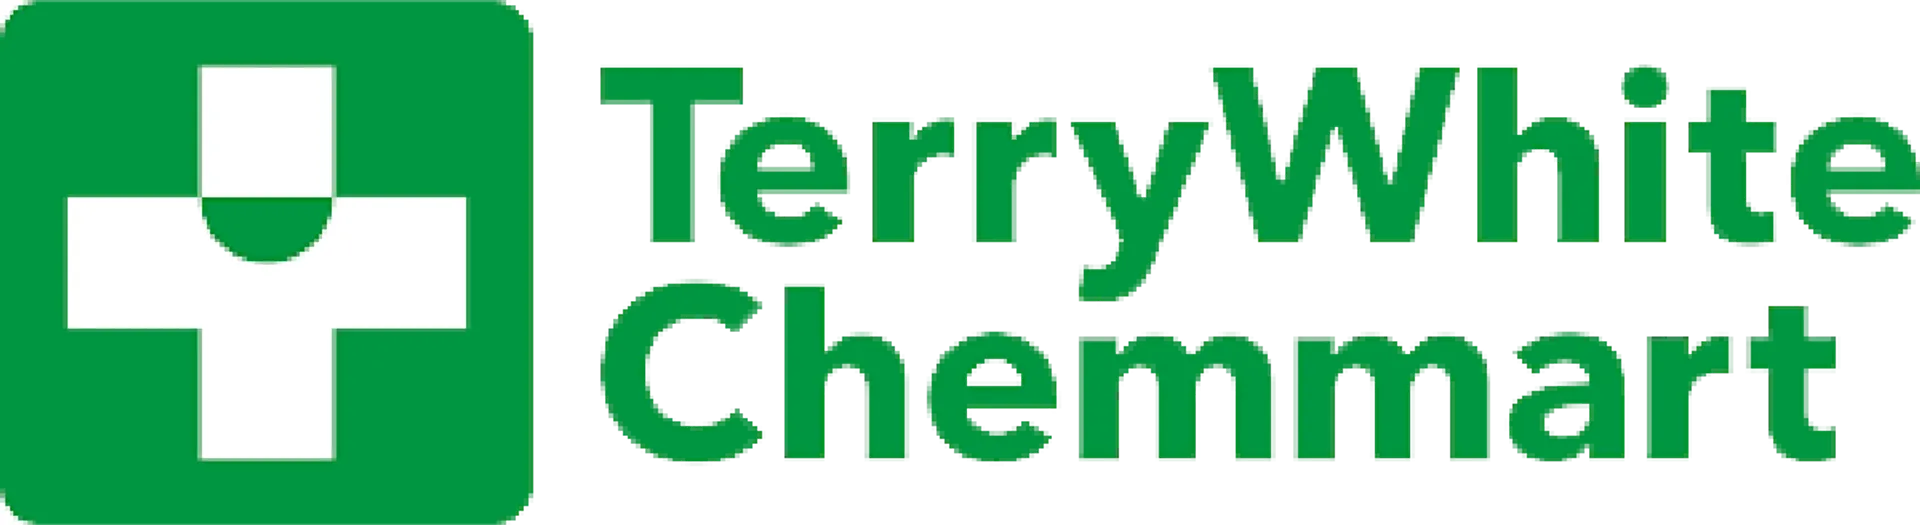 TERRYWHITE CHEMMART logo of current catalogue